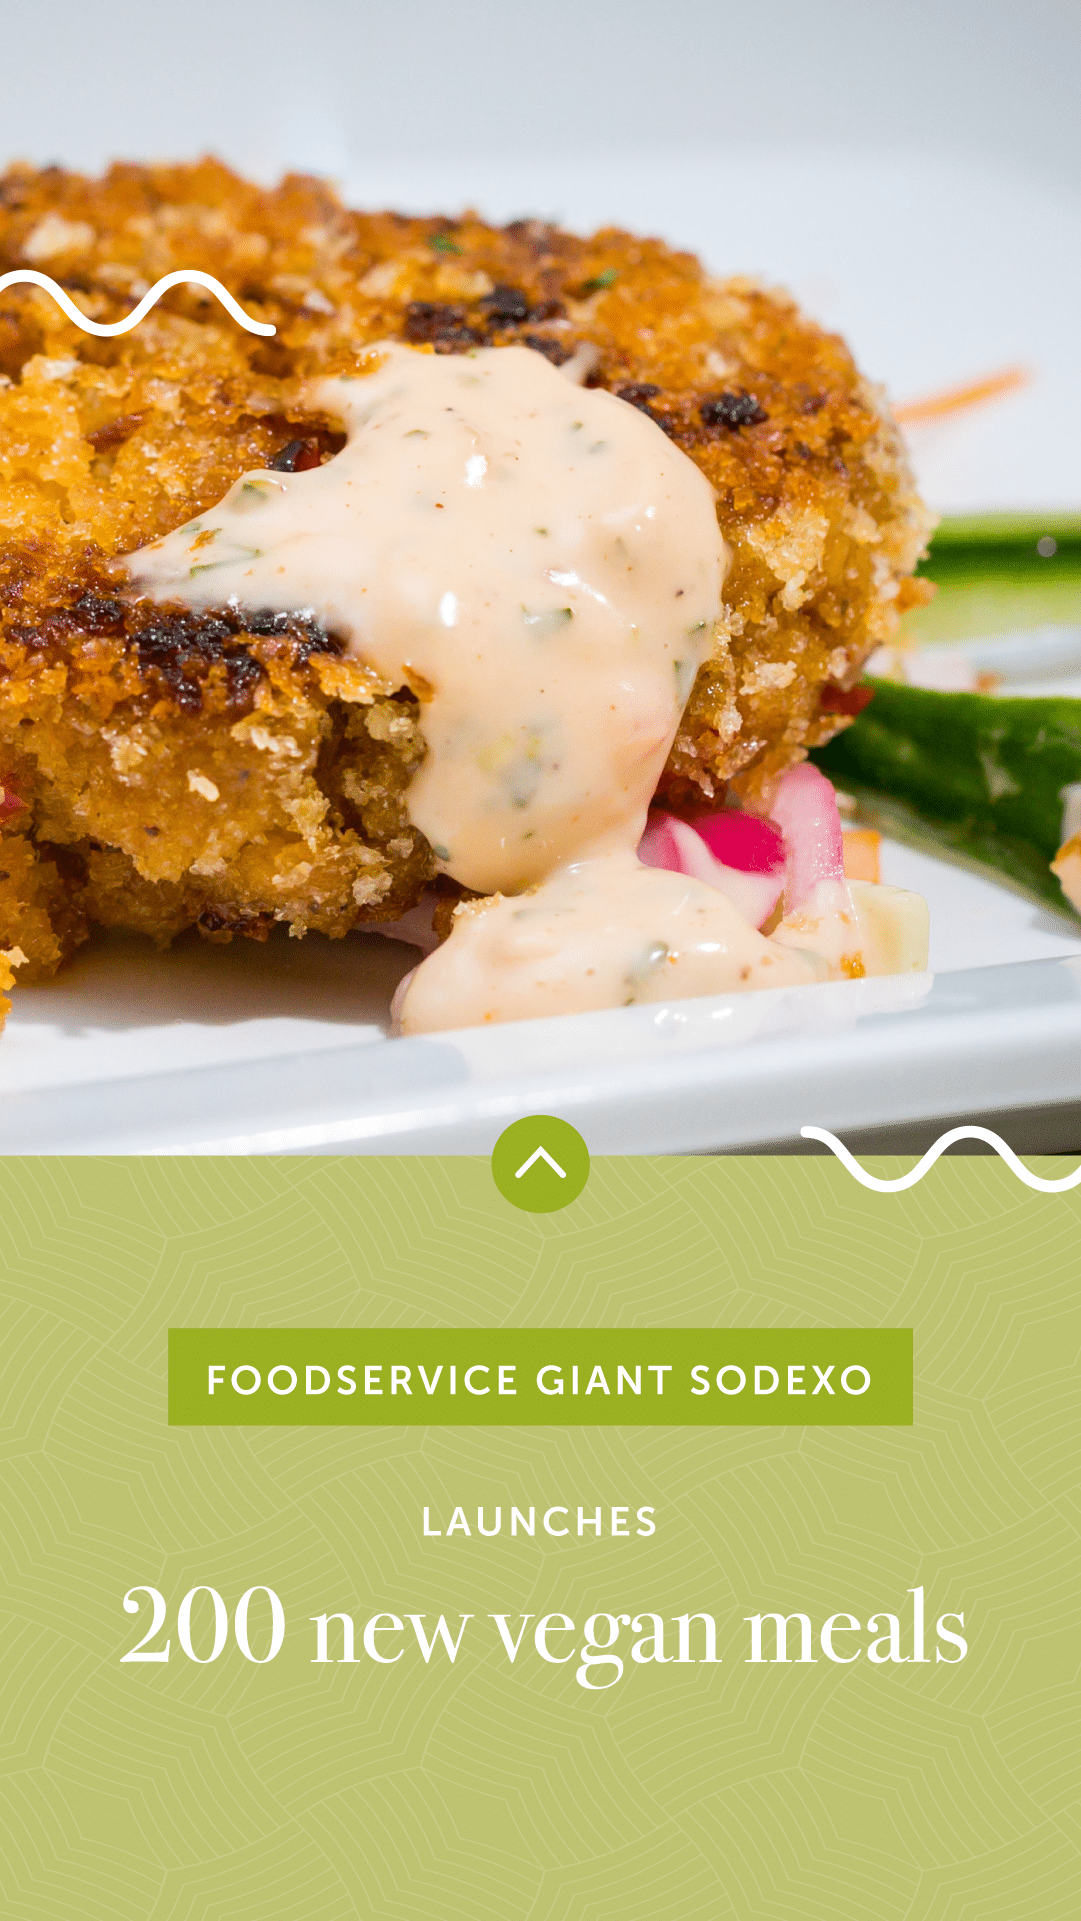 Foodservice Giant Sodexo Launches 200 New Vegan Meals